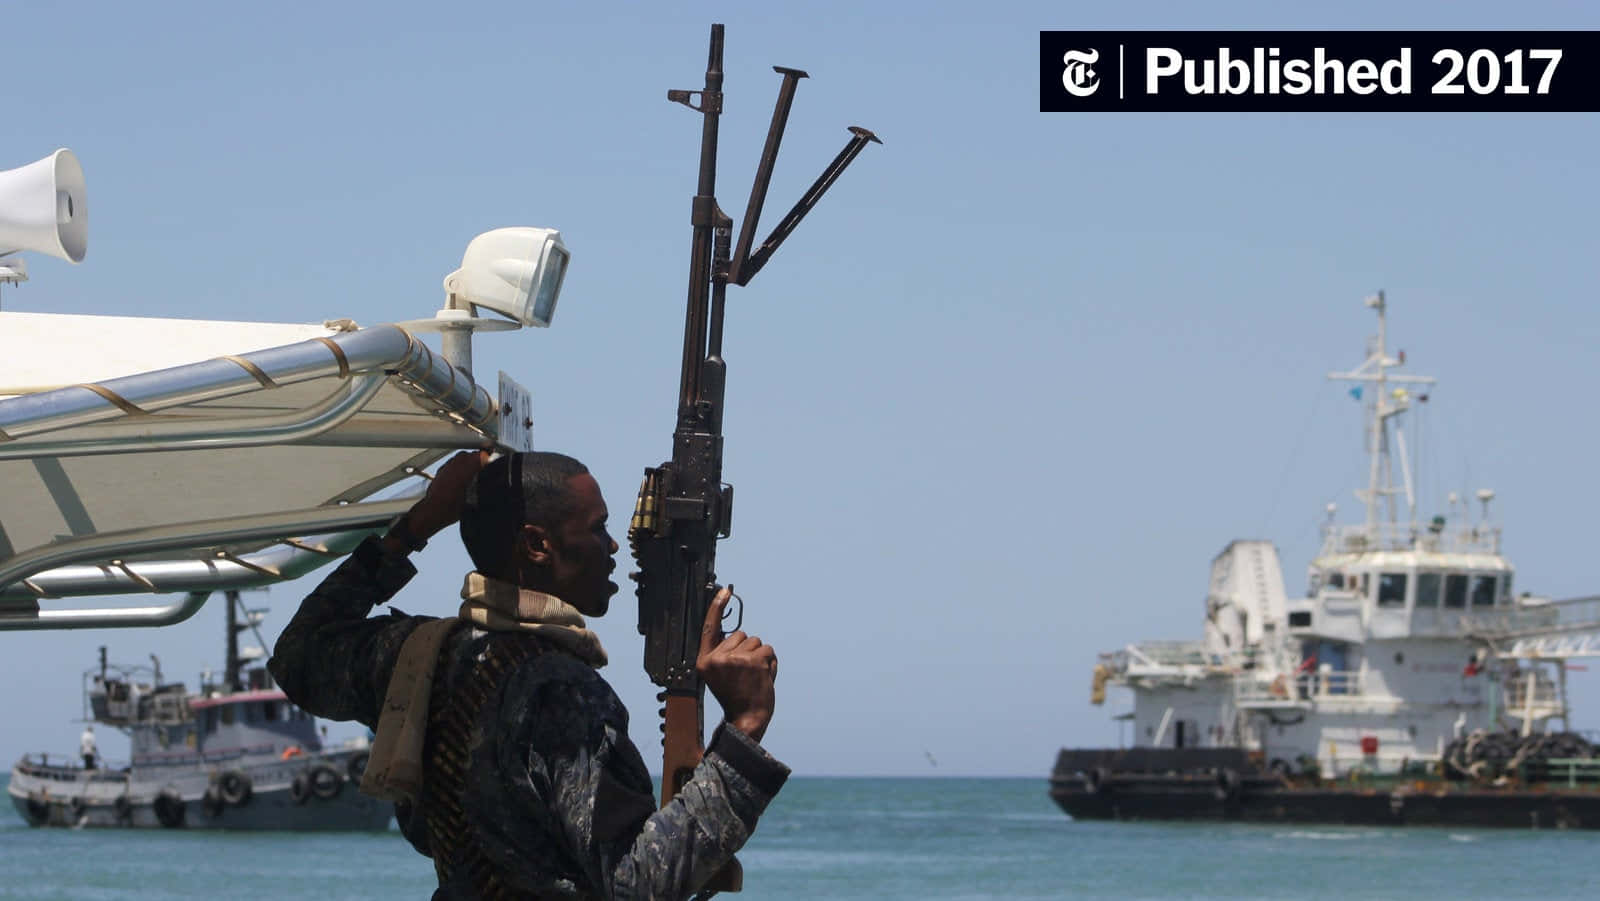 Real Pirate Somali With Gun Picture